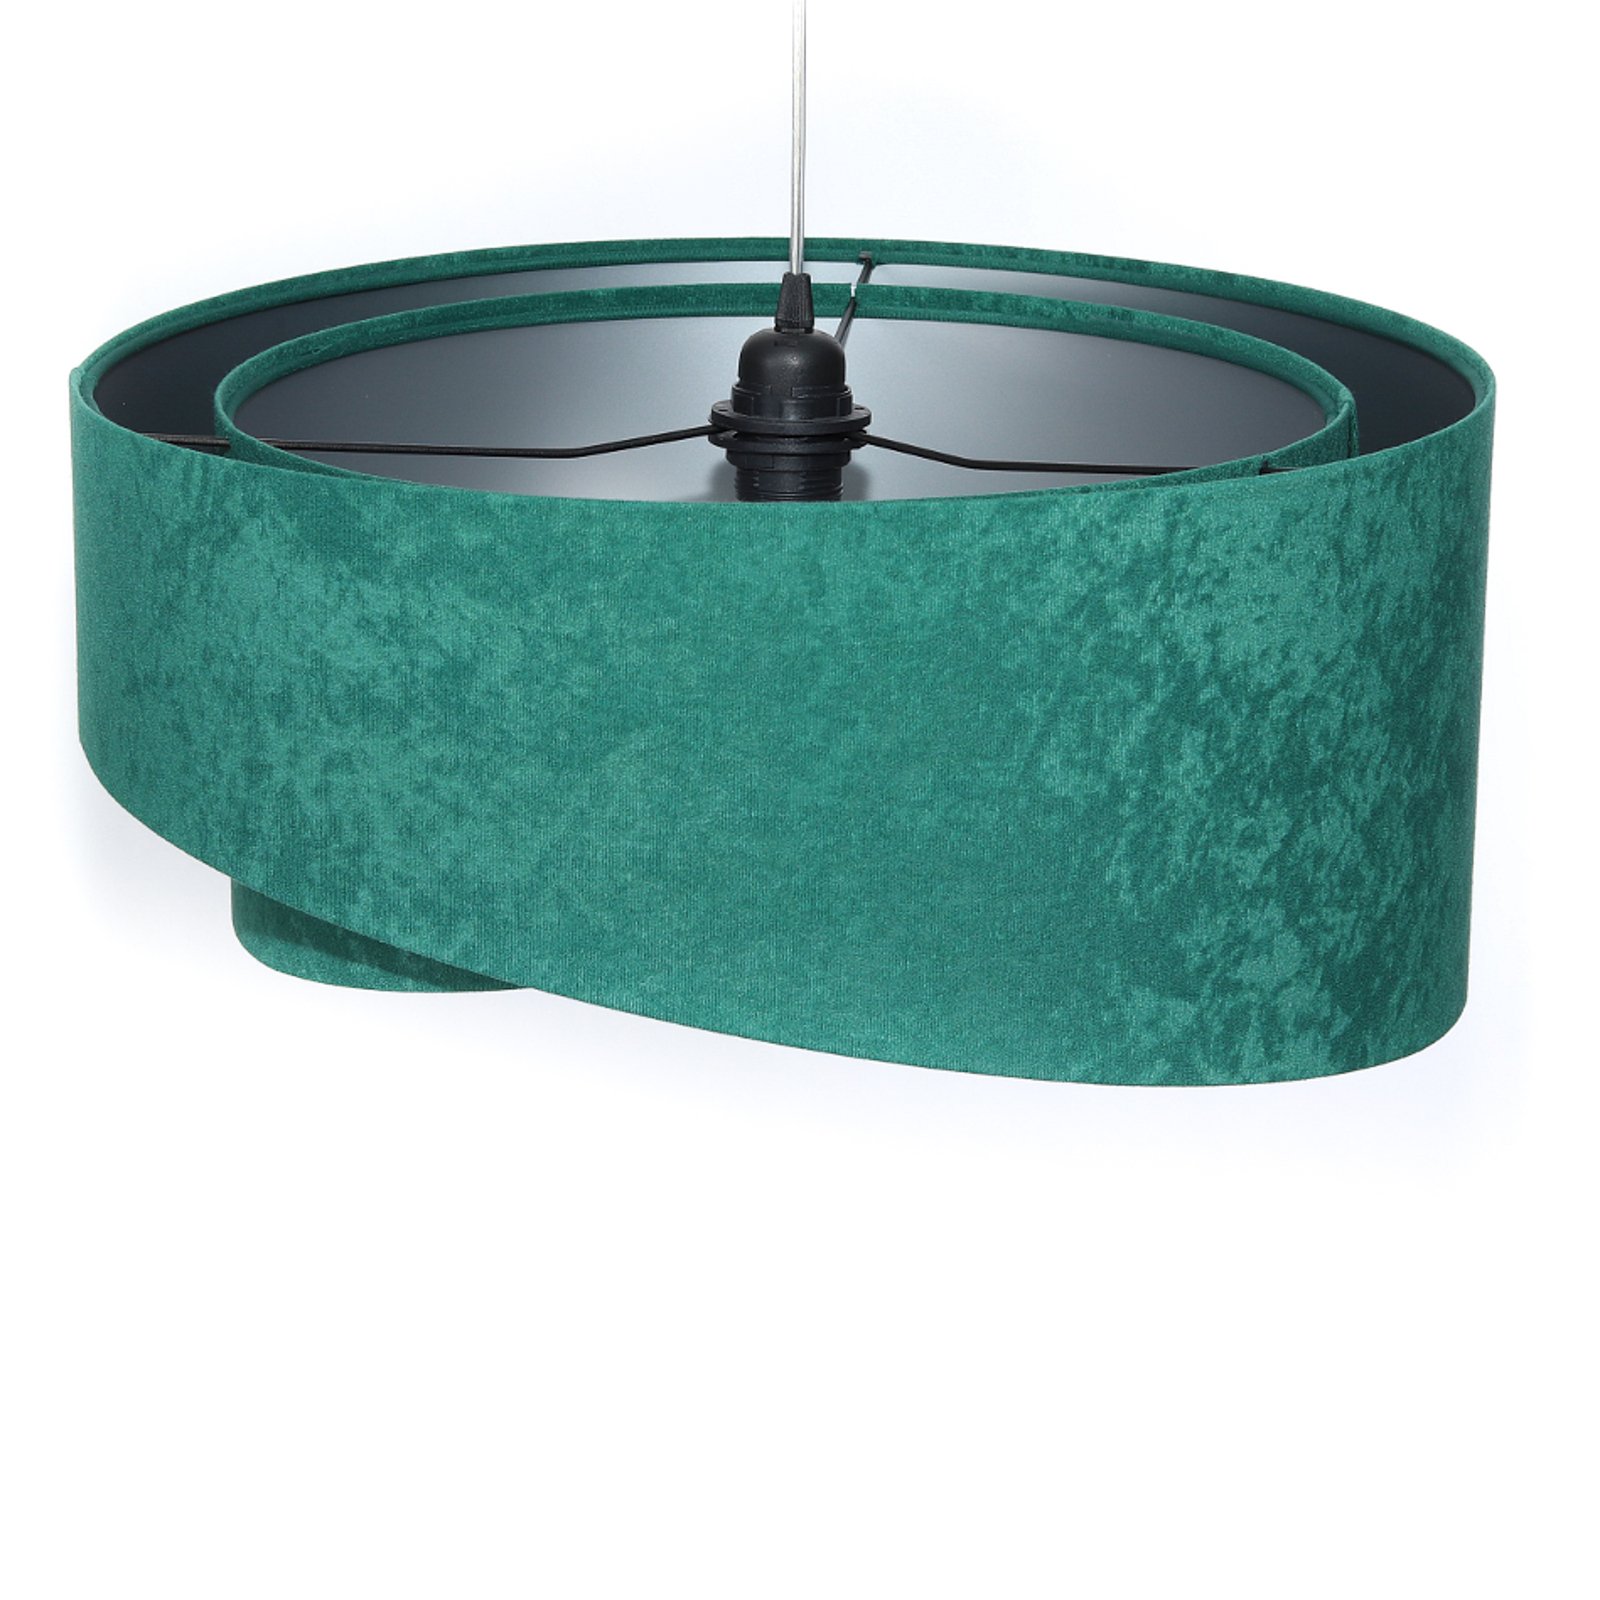 Vivien hanging light, two-tone, green/silver